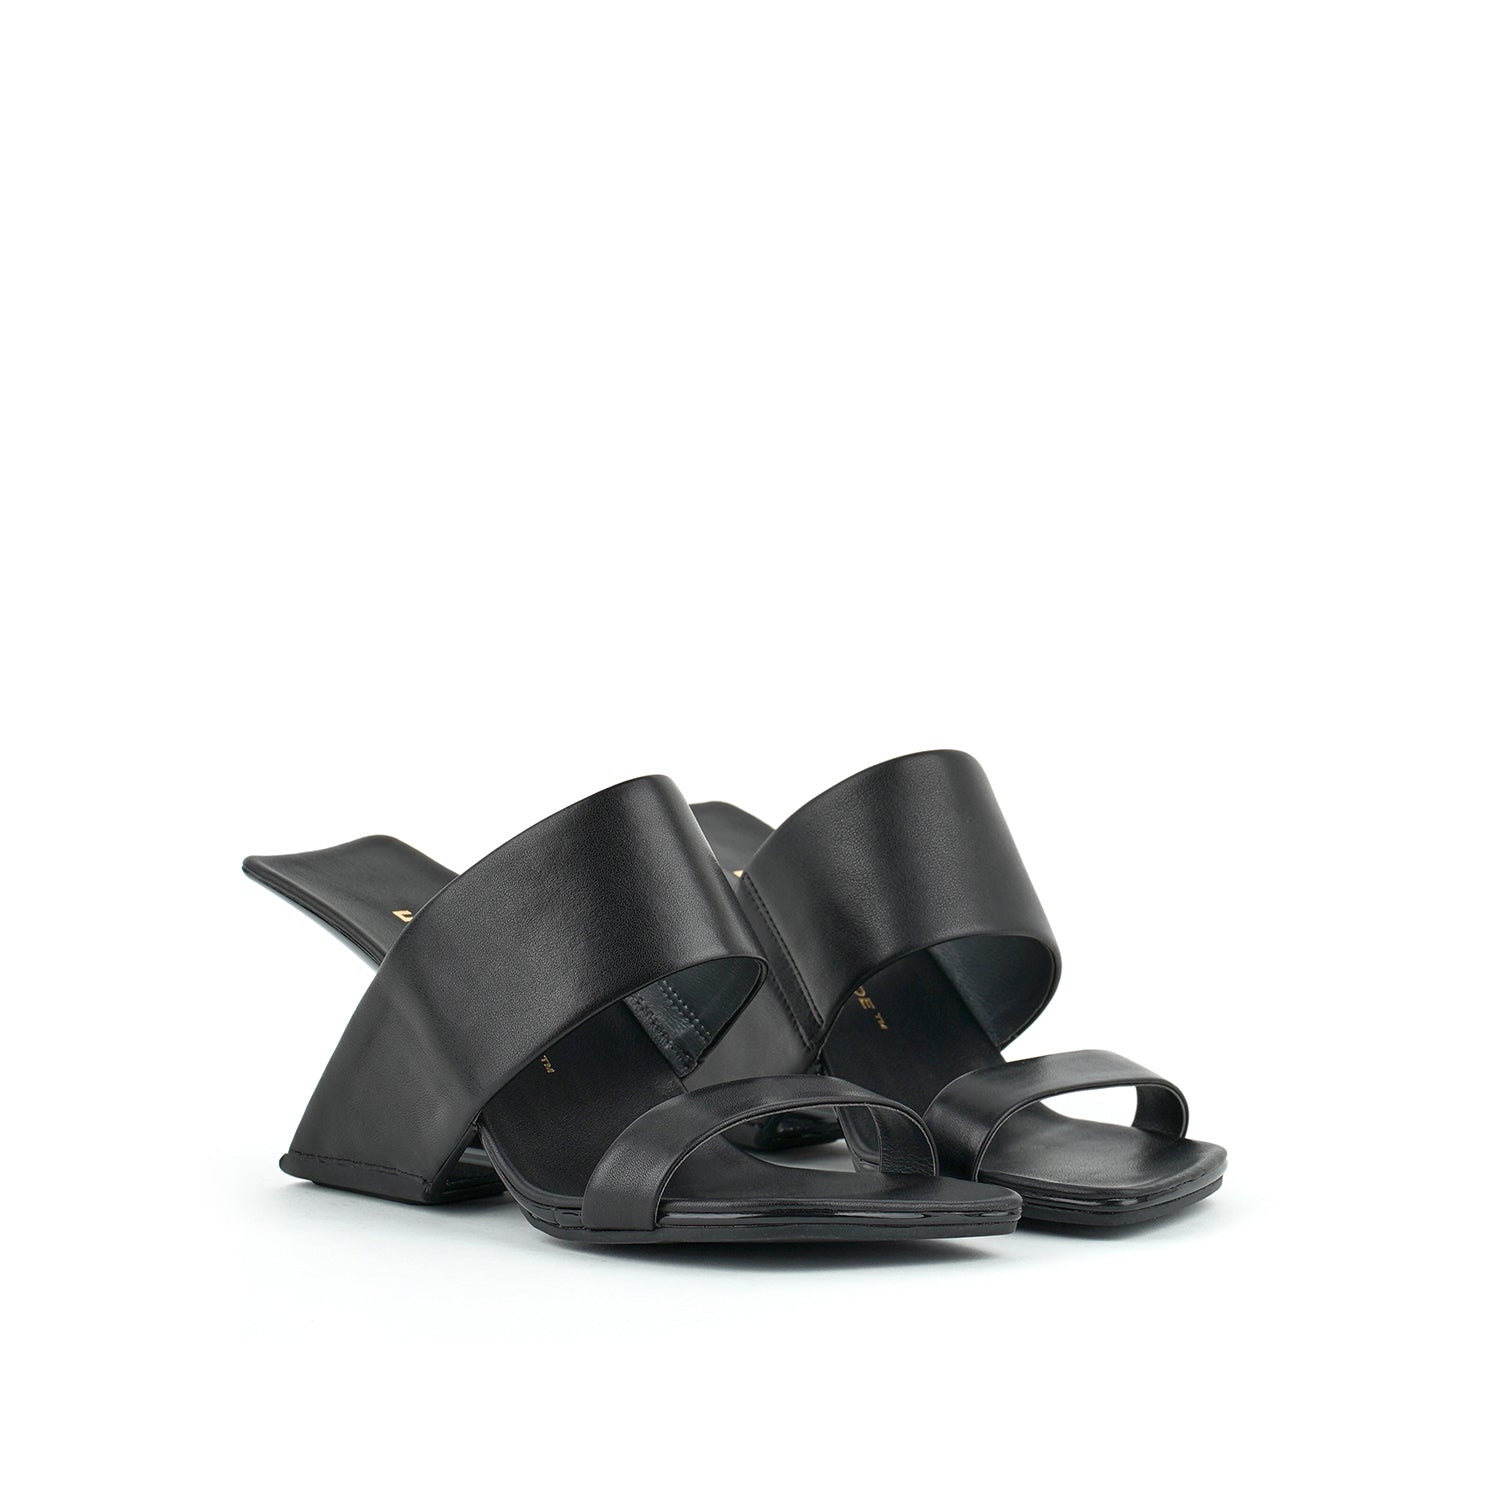 outer front side view of a pair of the united nude loop hi sandal. This black square toed sandal is high-heeled and showcases a floating-like heel and two bands over the instep.  